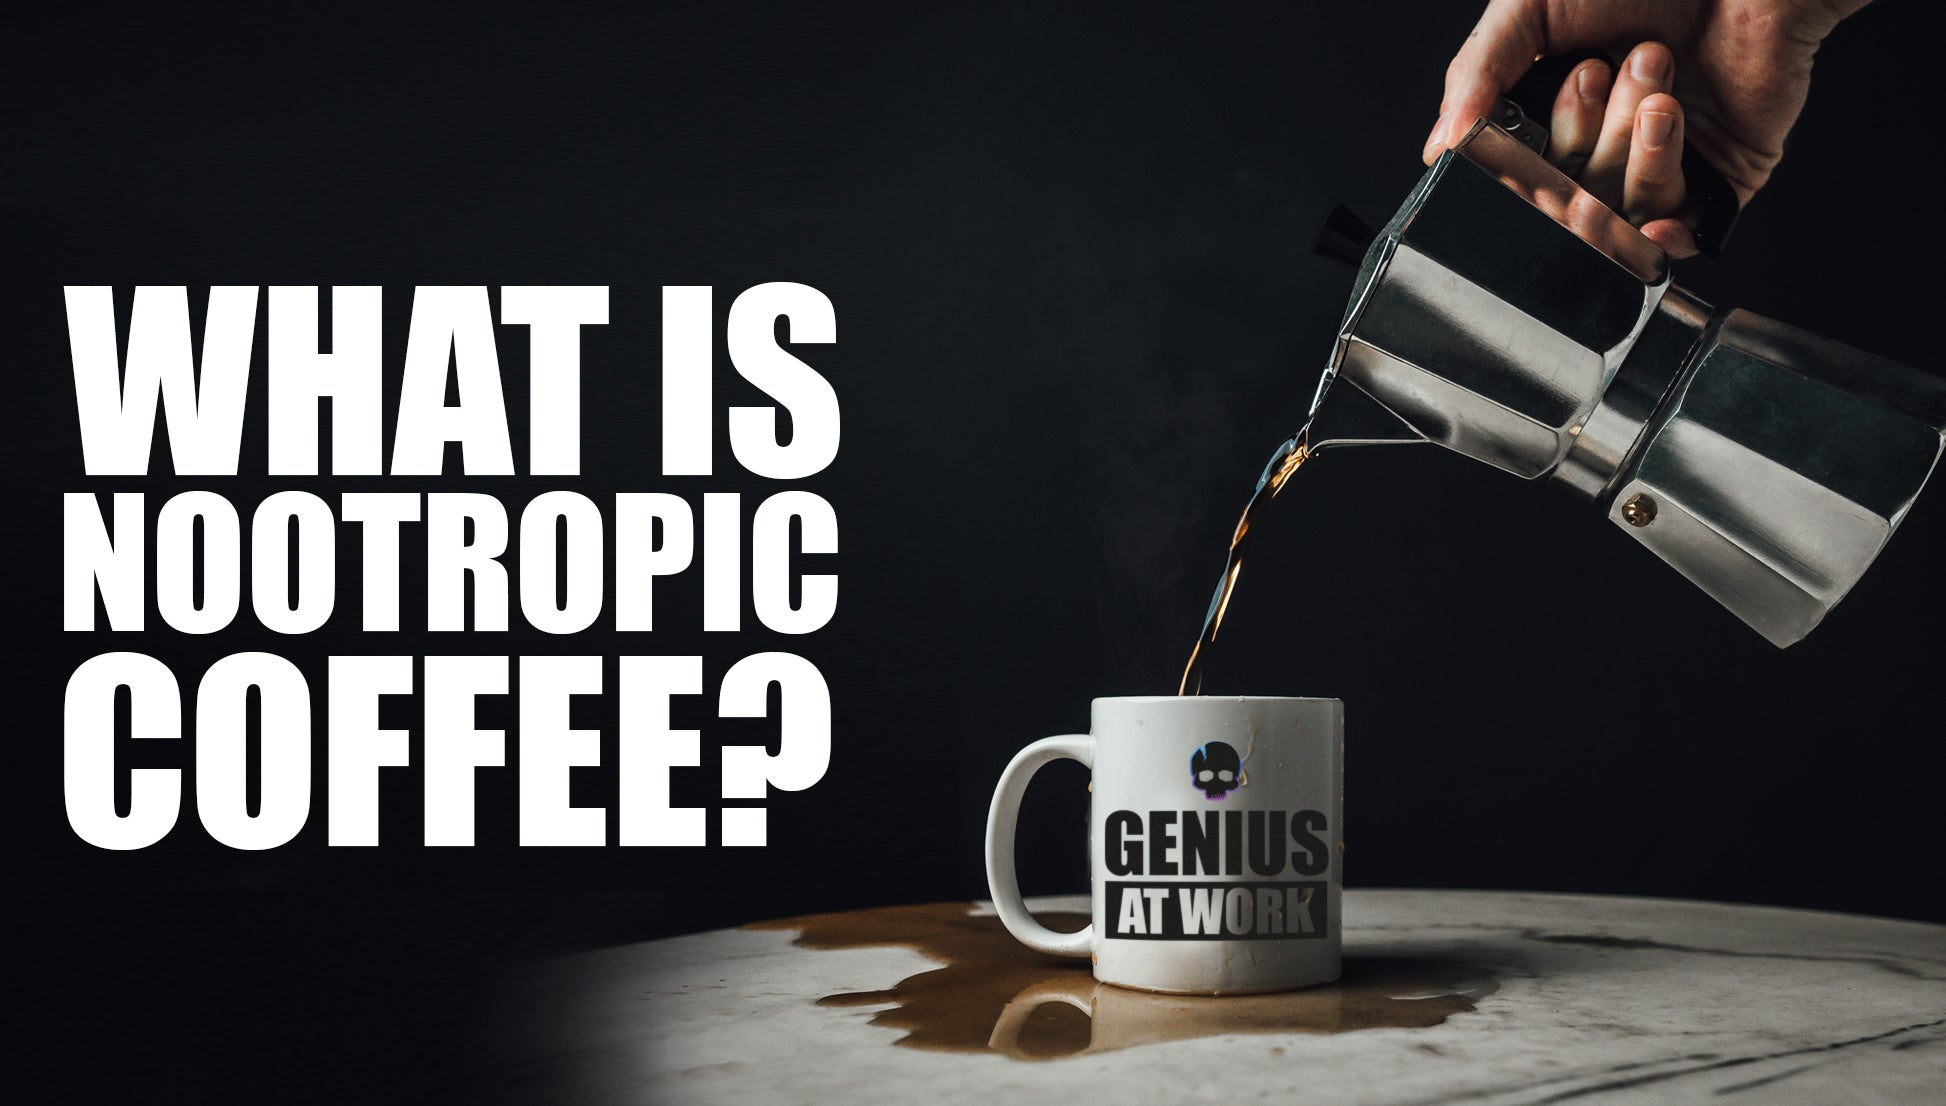 What is Nootropic Coffee?